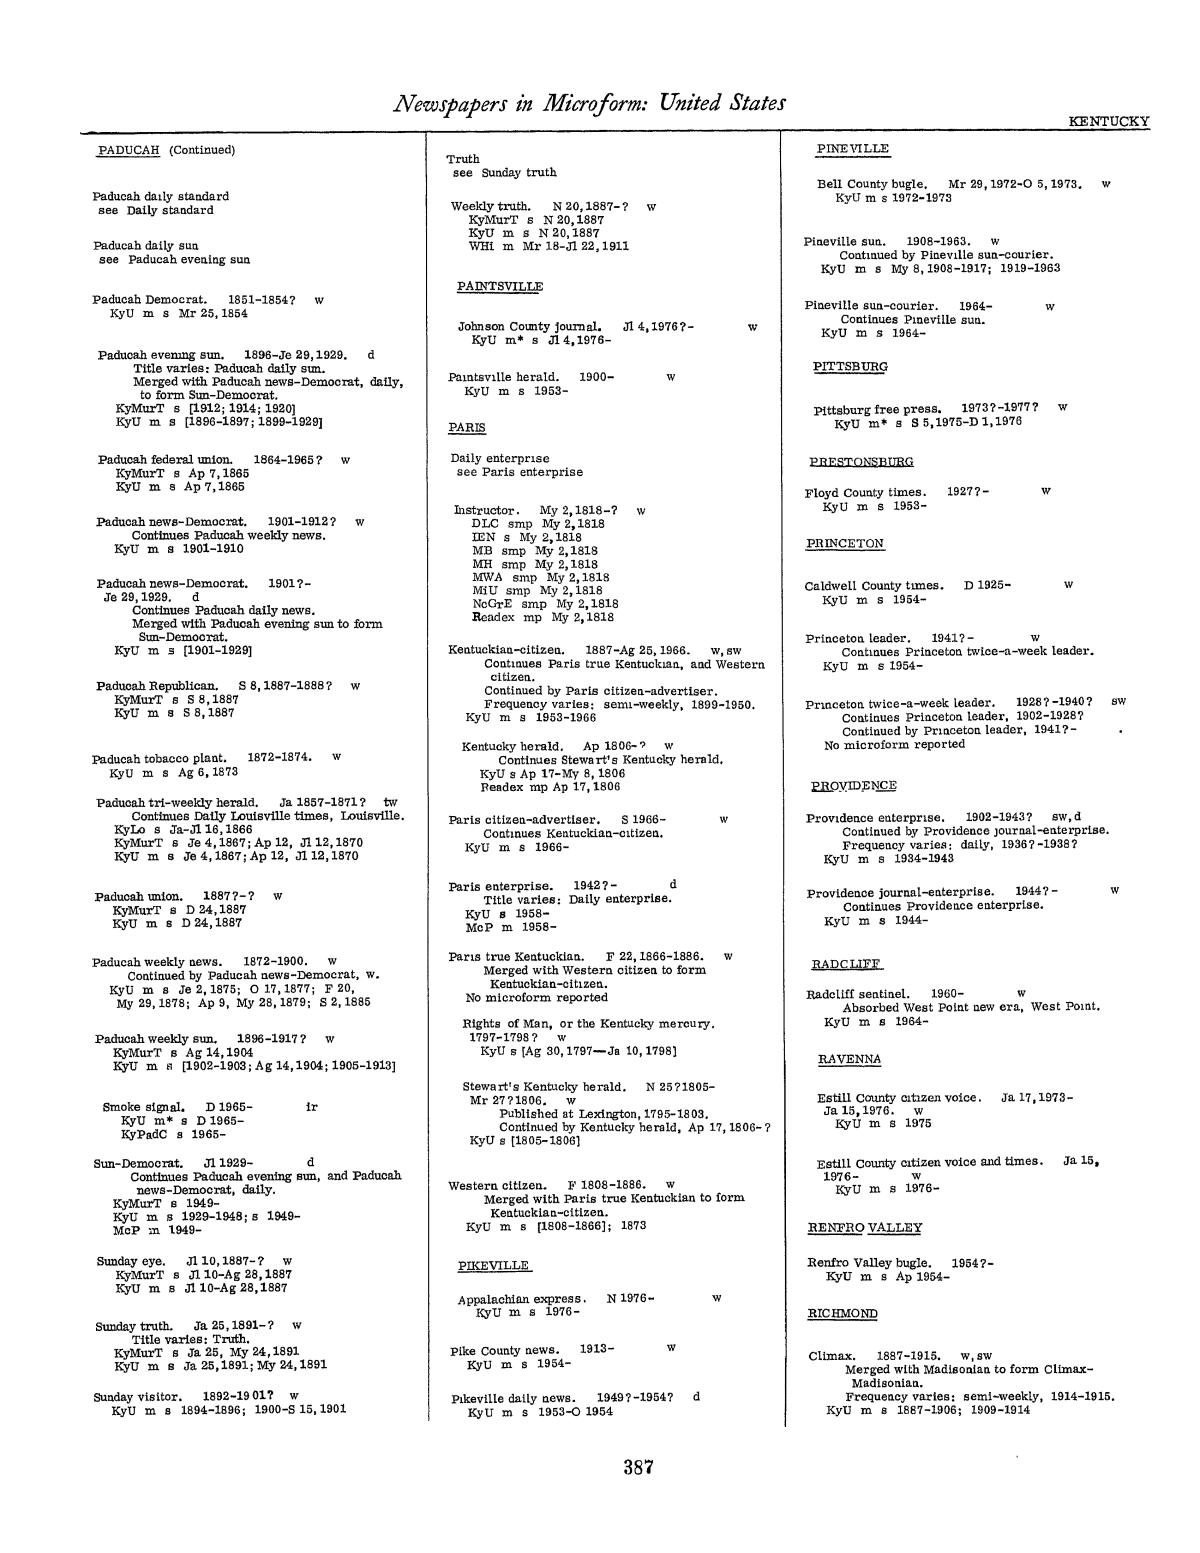 Library of Congress Catalogs: Newspapers in Microform, United States, 1948-1983, Volume 1 A-O
                                                
                                                    387
                                                